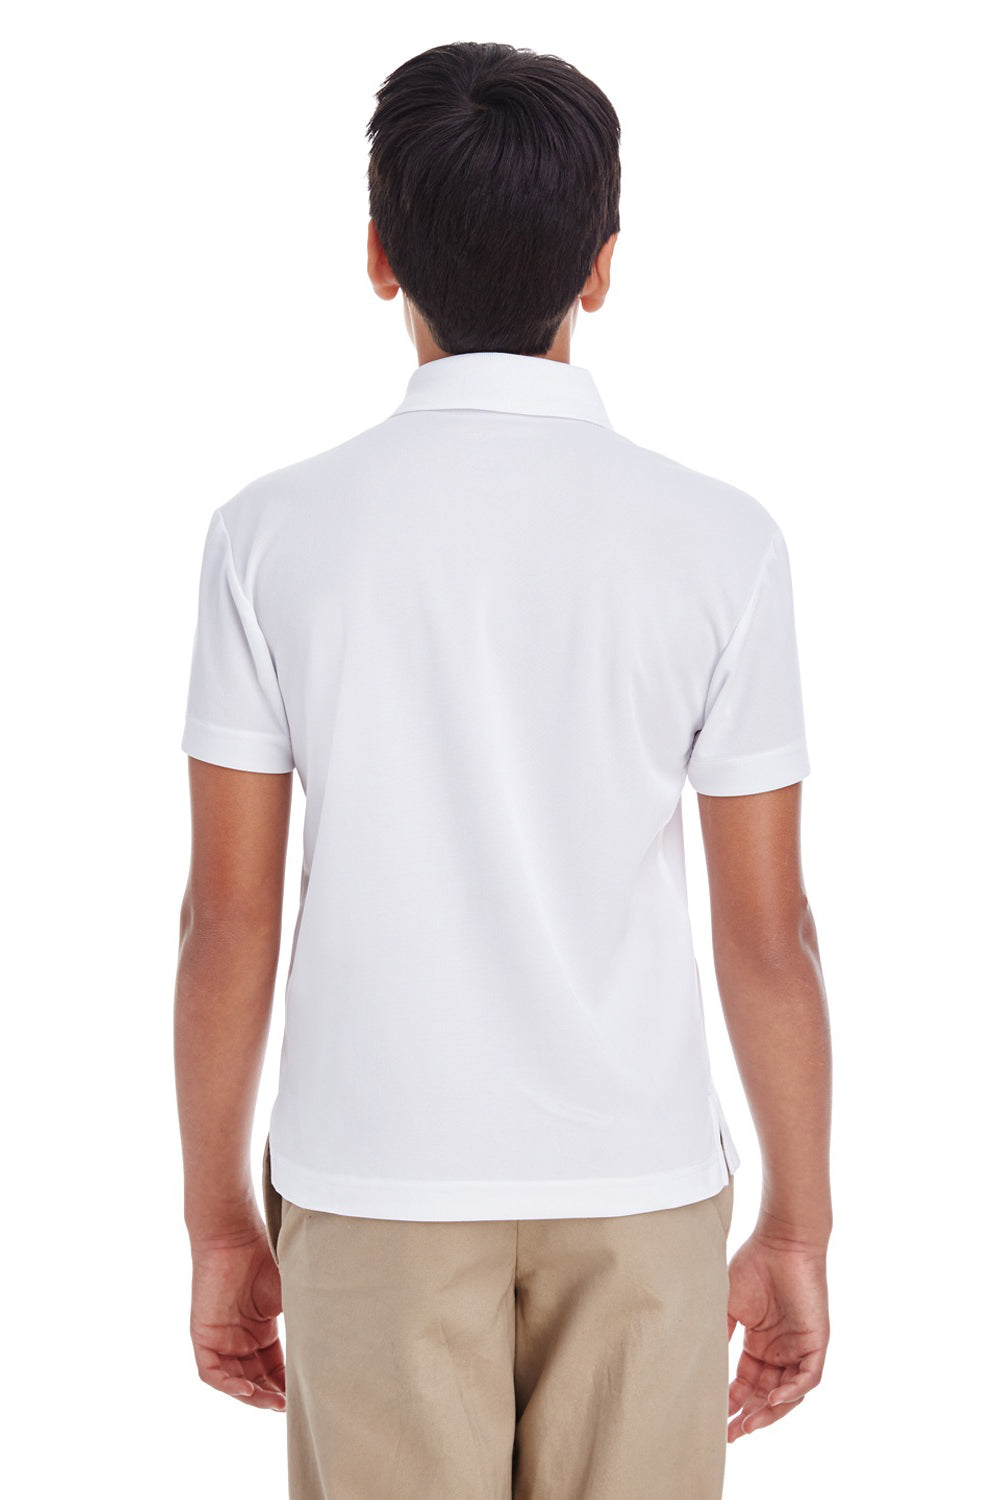 Core 365 88181Y Youth Origin Performance Moisture Wicking Short Sleeve Polo Shirt White Back